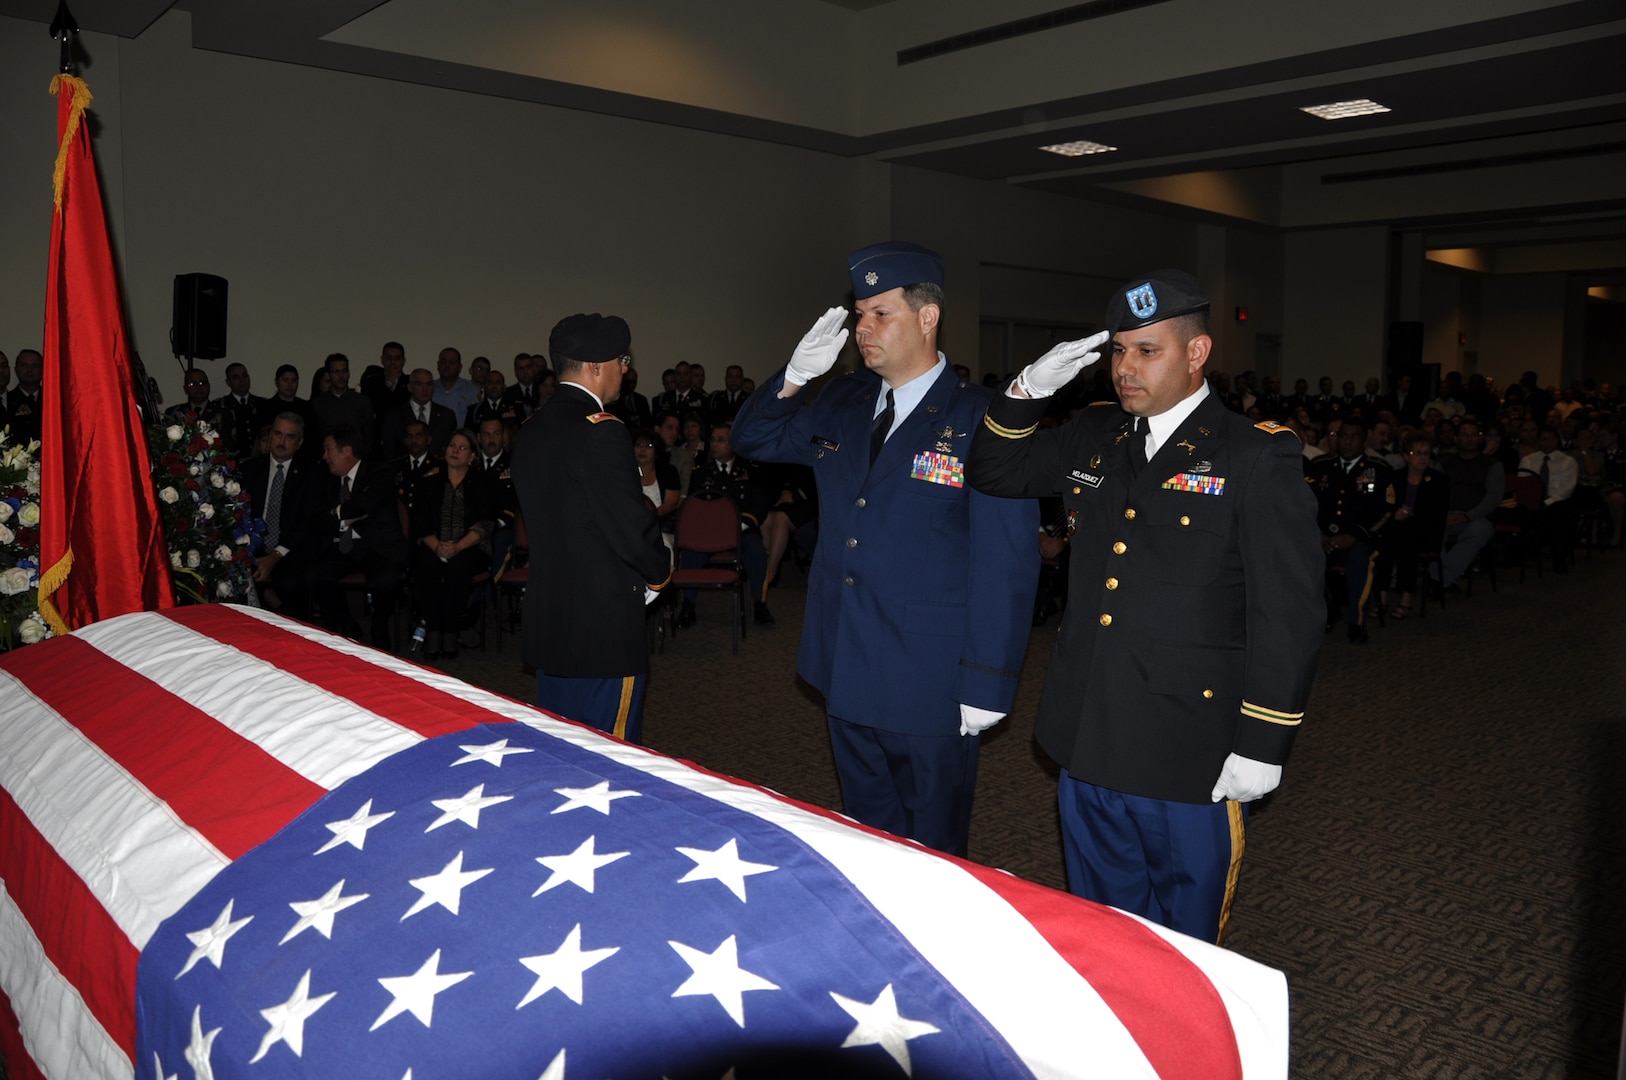 Army Brig. Gen. Victor J. Torres, one of six people killed in the Dec. 20 crash of a UH-72A Lakota helicopter, is honored at a wake in his hometown of Coamo, Puerto Rico, on Dec. 27, 2010. Torres was deputy adjutant general of the Puerto Rico National Guard.